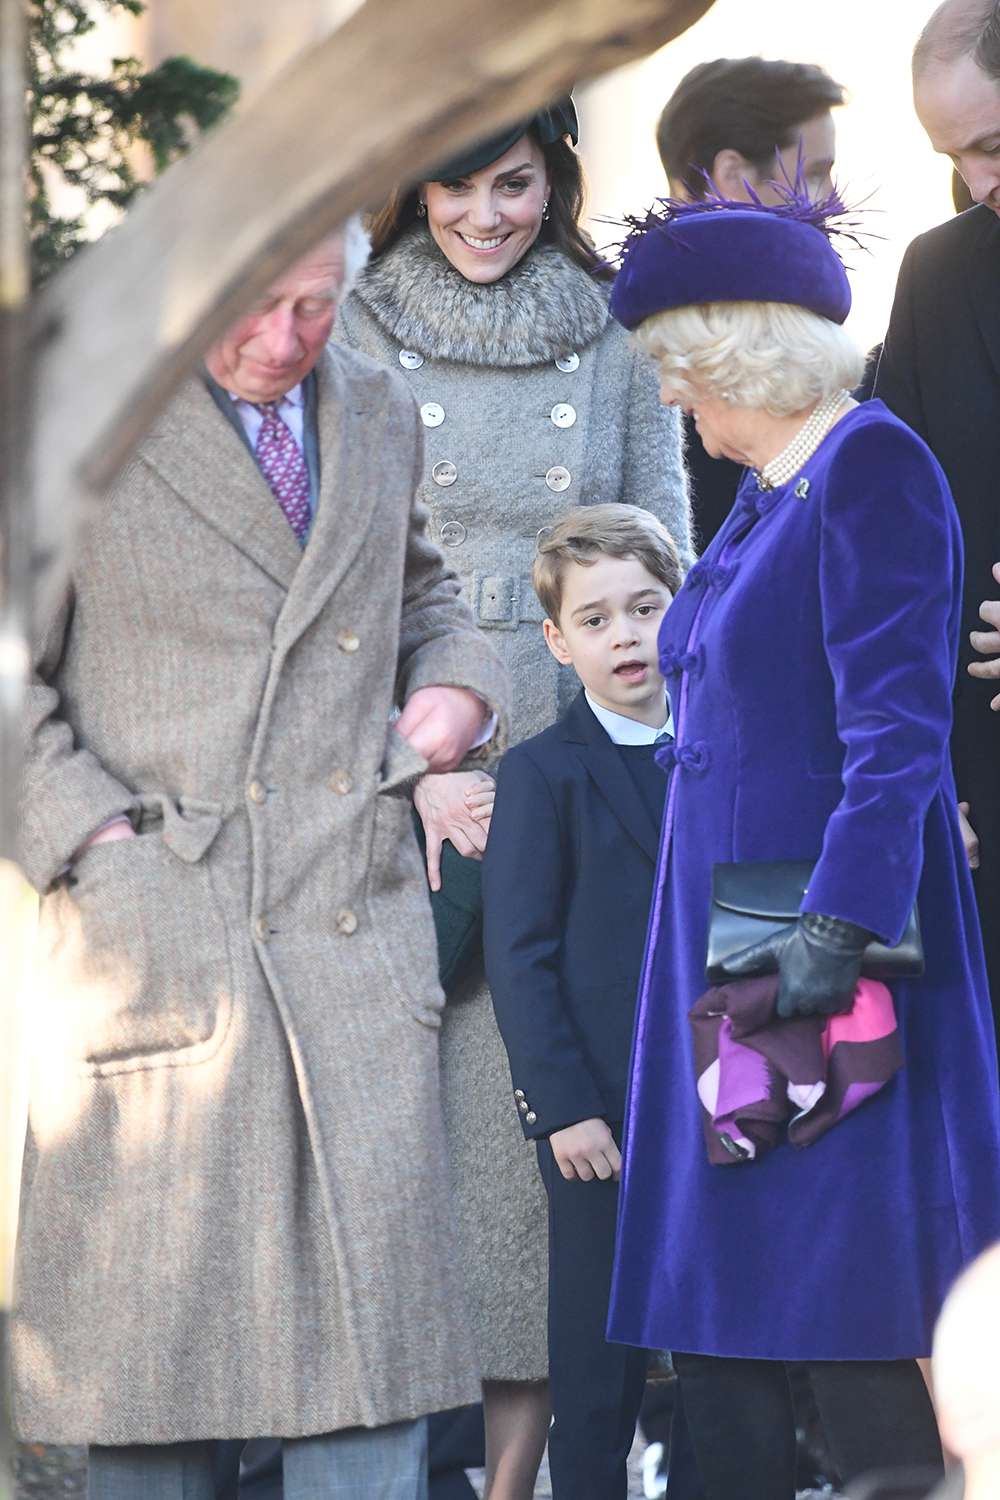 The Prince of Wales, the Duchess of Cambridge, Prince George and the Duchess of Cornwall after attending the Christmas Day morning church service at St Mary Magdalene Church in Sandringham, Norfolk. (Photo by Joe Giddens/PA Images via Getty Images)